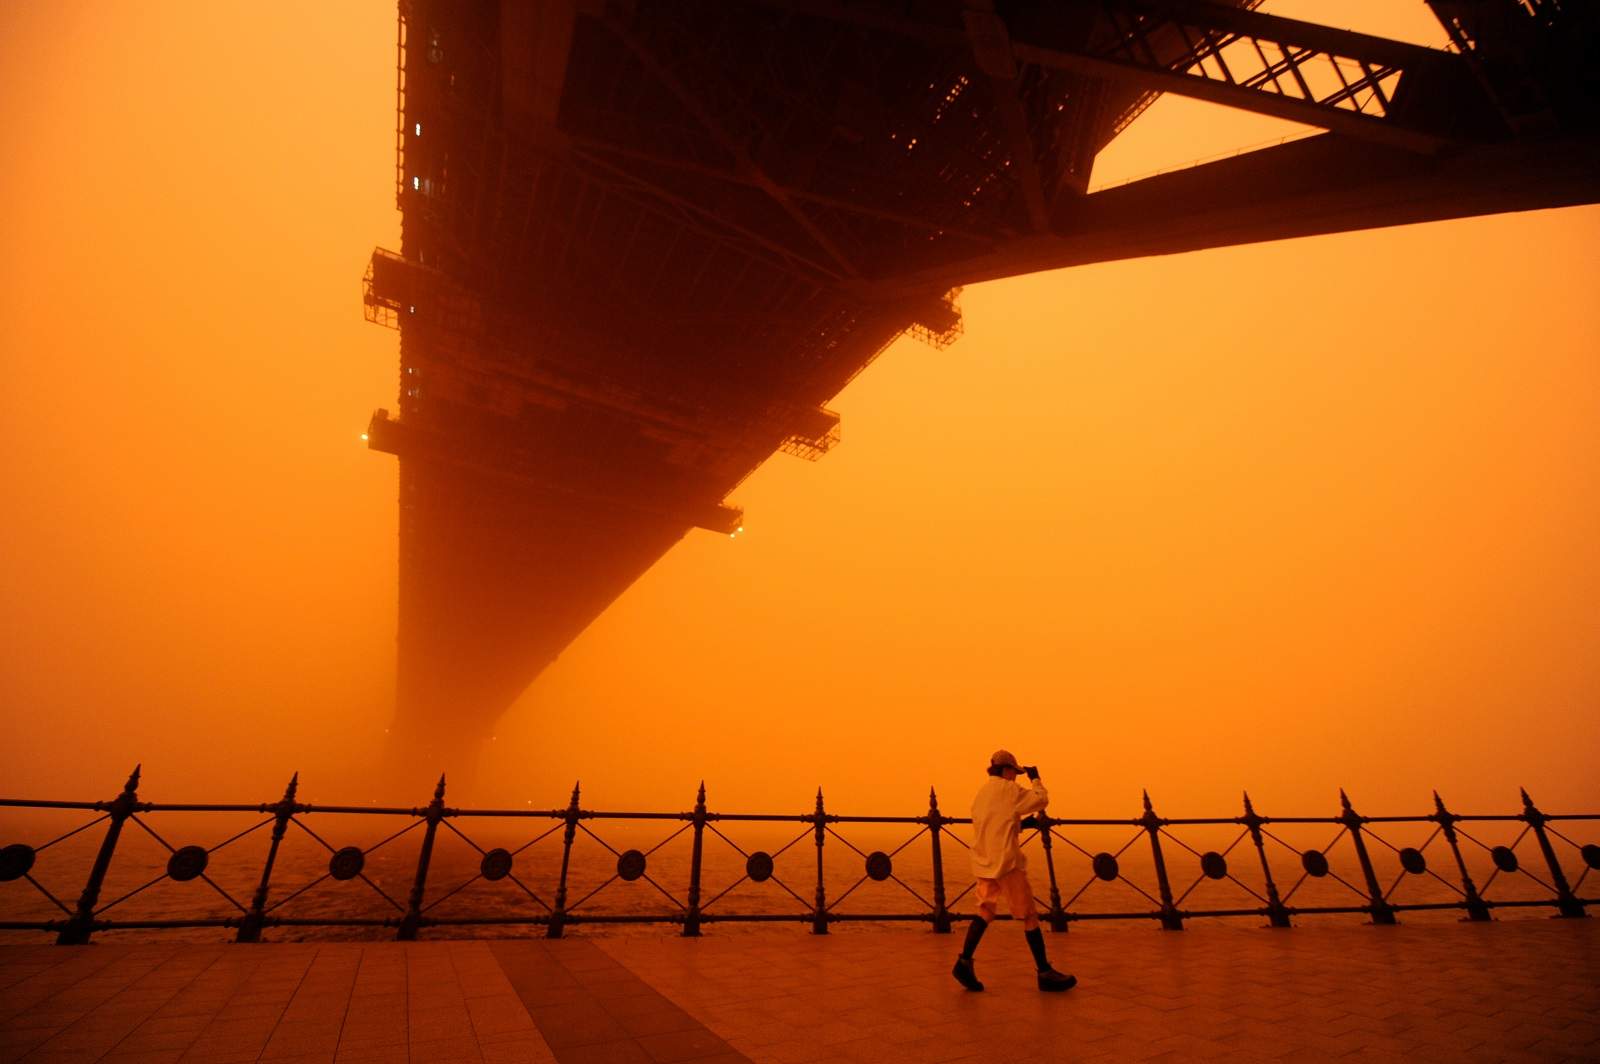 In September 2009, the so-called “Red Dawn” dust storm overwhelmed Sydney (James D Morgan/Getty Images)